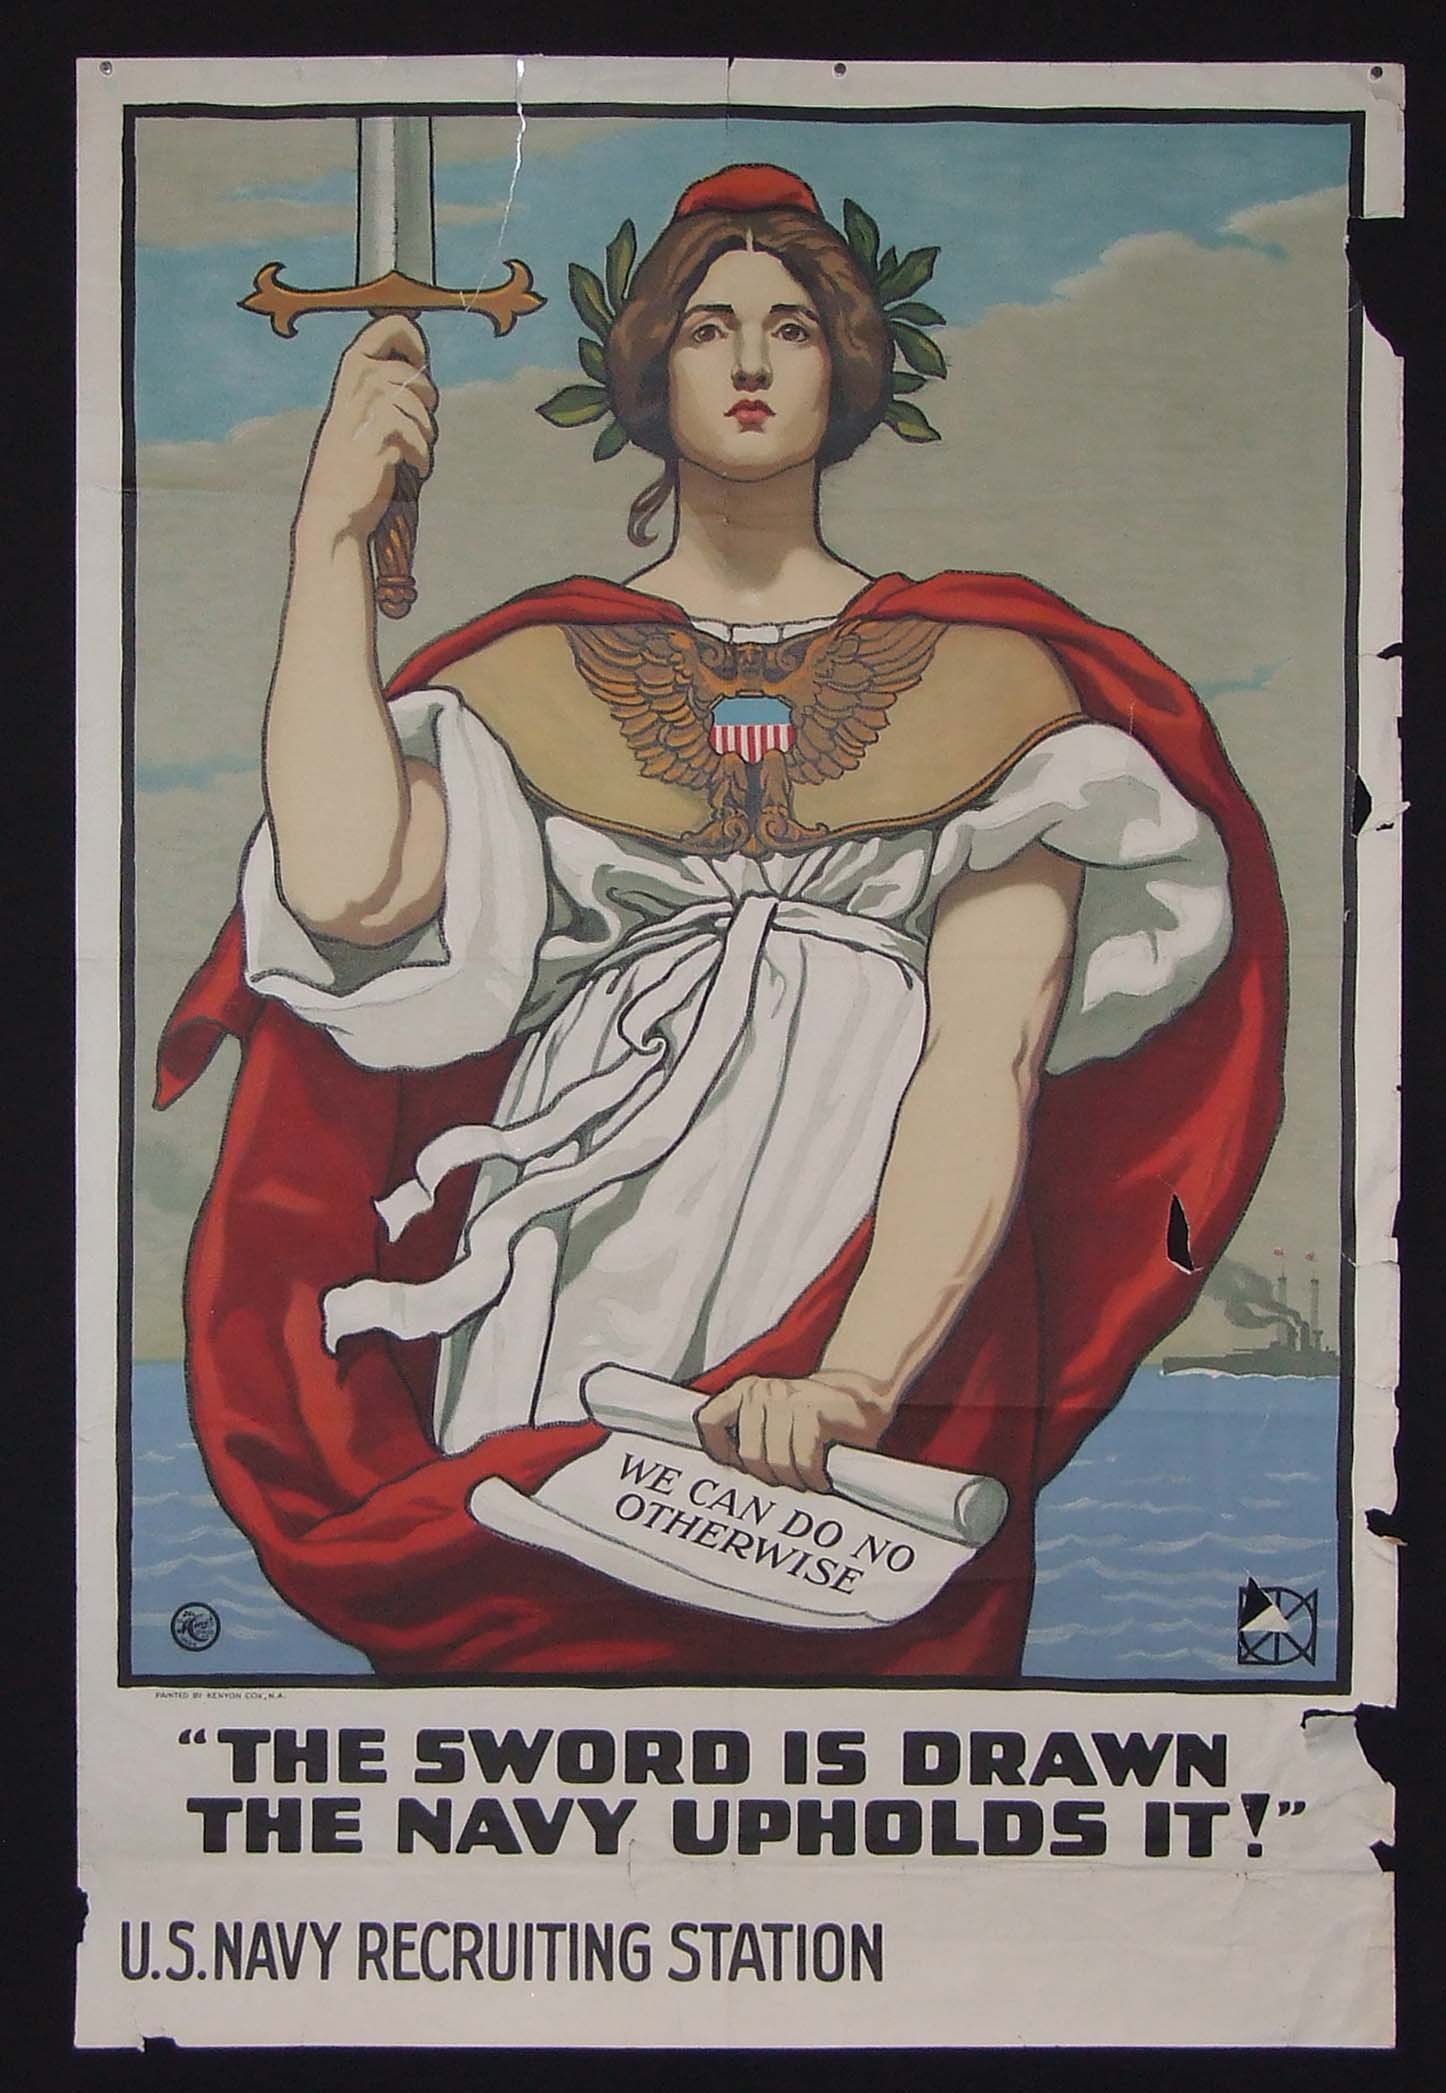 The sword is drawn - the navy upholds it